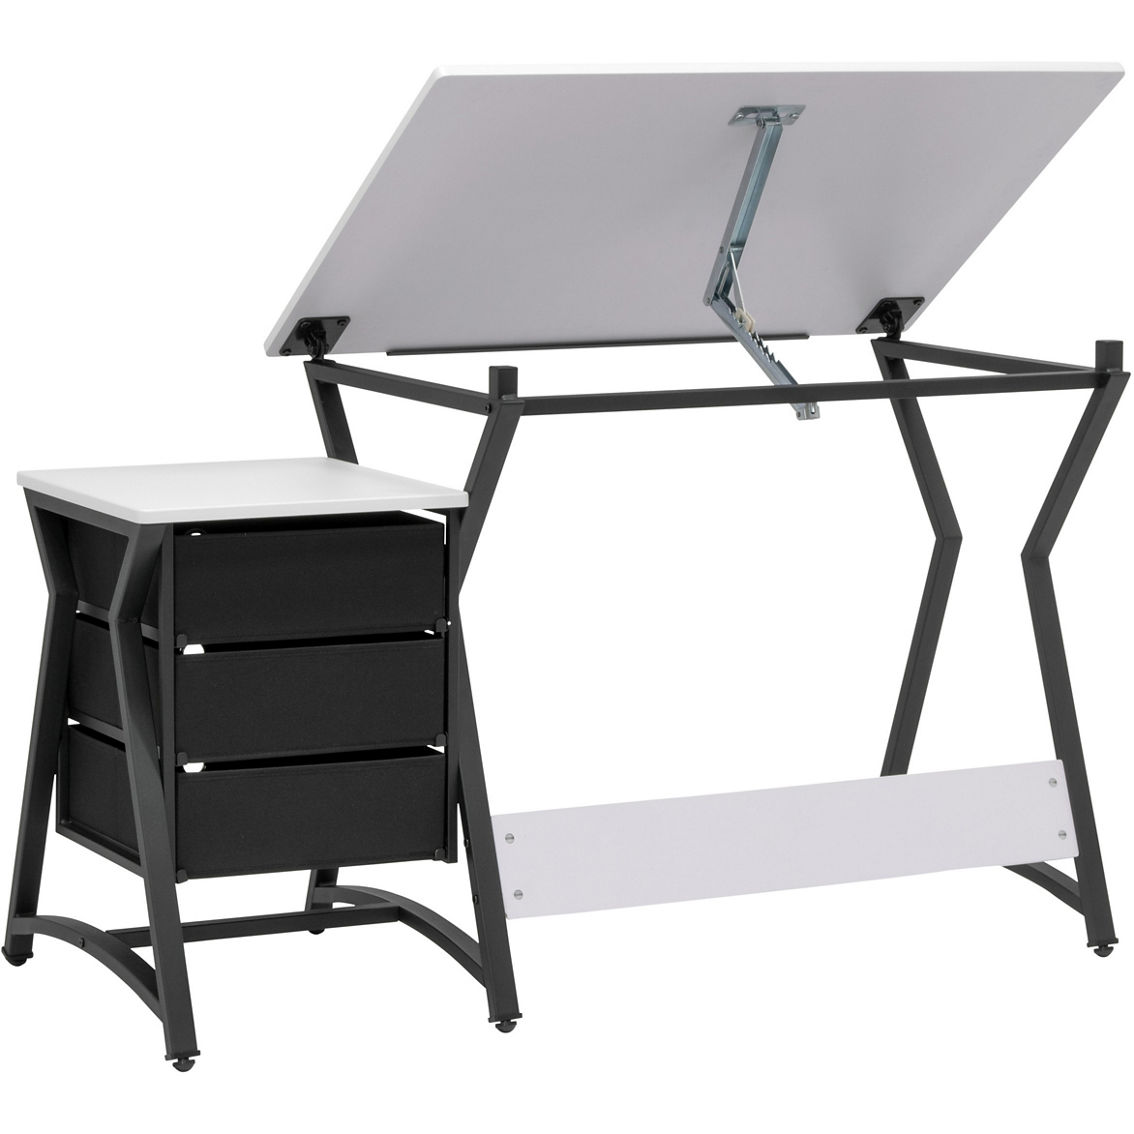 Studio Designs Hourglass Craft Center Angle Adjustable Drafting Table with Drawers - Image 4 of 10